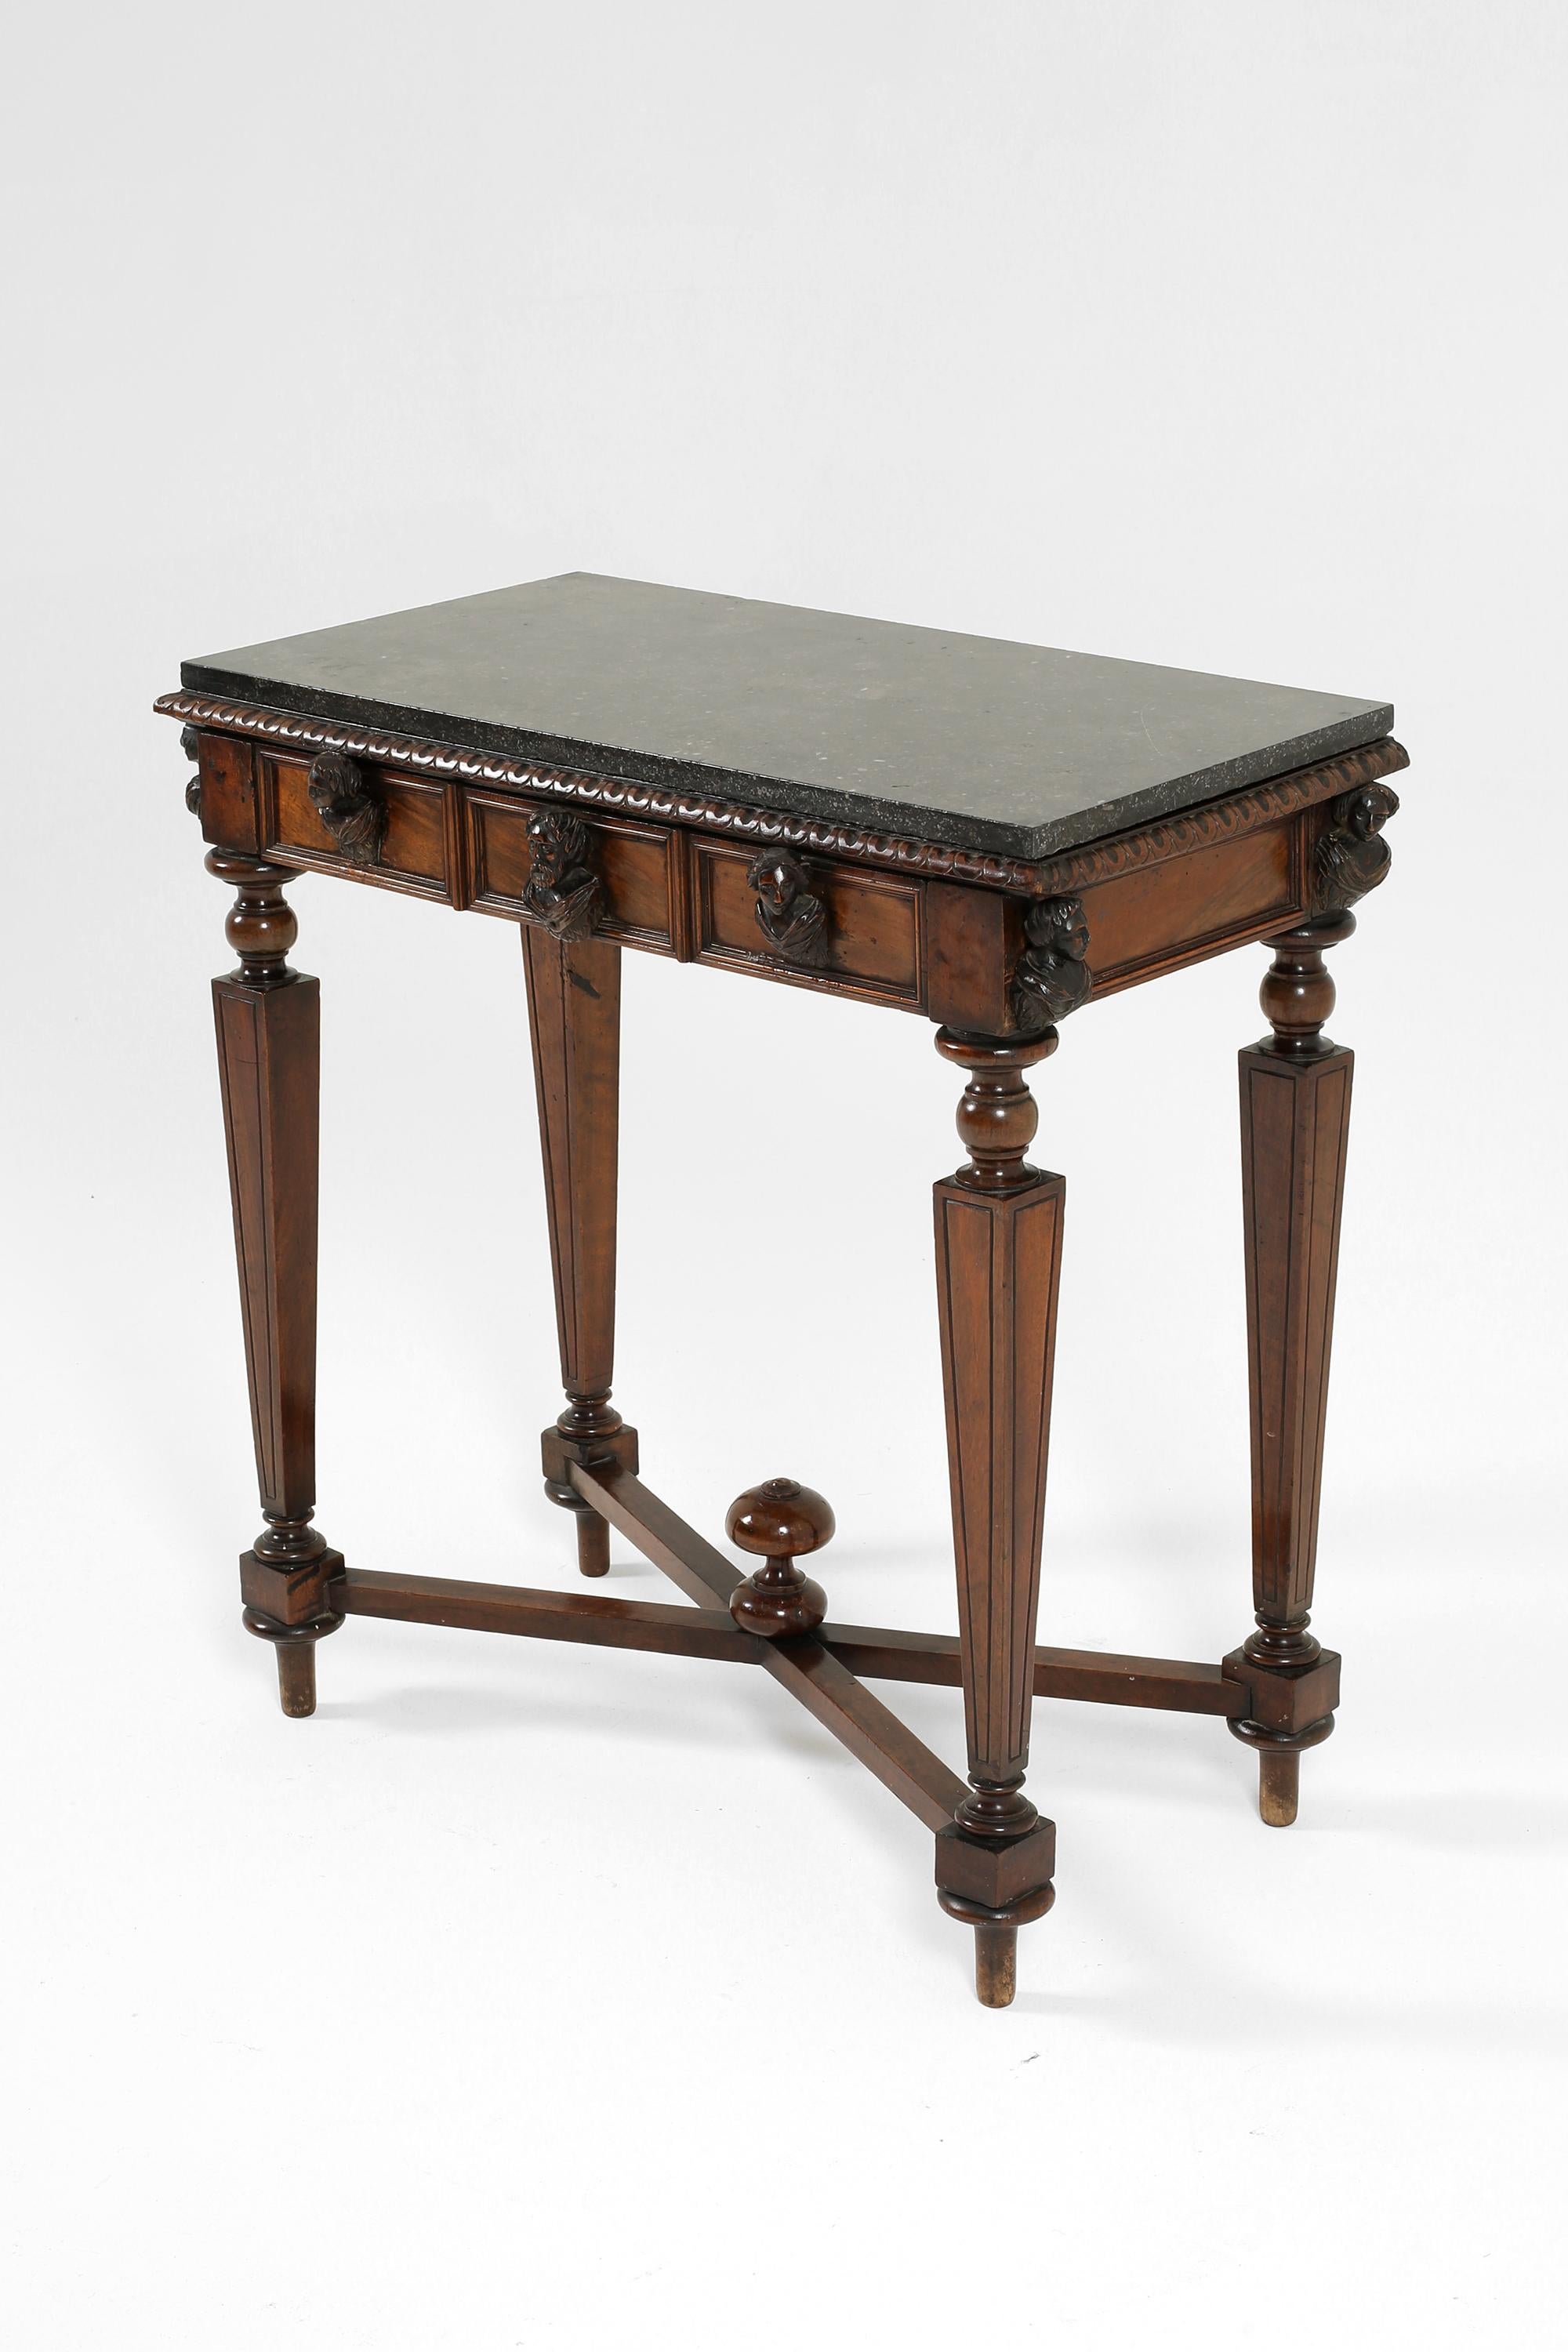 A 19th century side/lamp table in solid walnut with likely its original black marble top. Featuring carved male and female busts to the frieze, turned and carved square tapered legs and a cross stretcher with central finial. Italian, c. 1870.